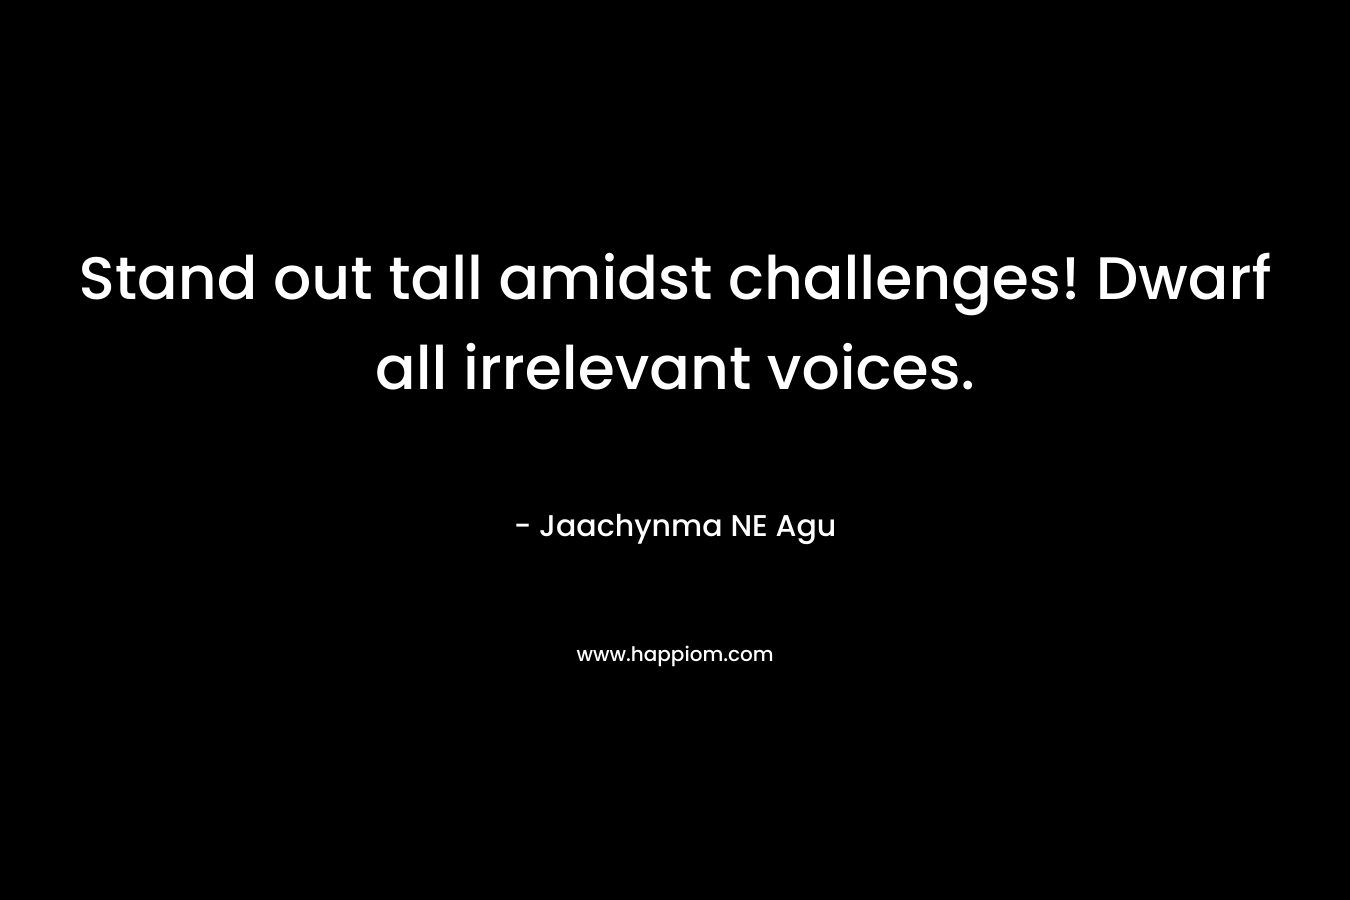 Stand out tall amidst challenges! Dwarf all irrelevant voices.